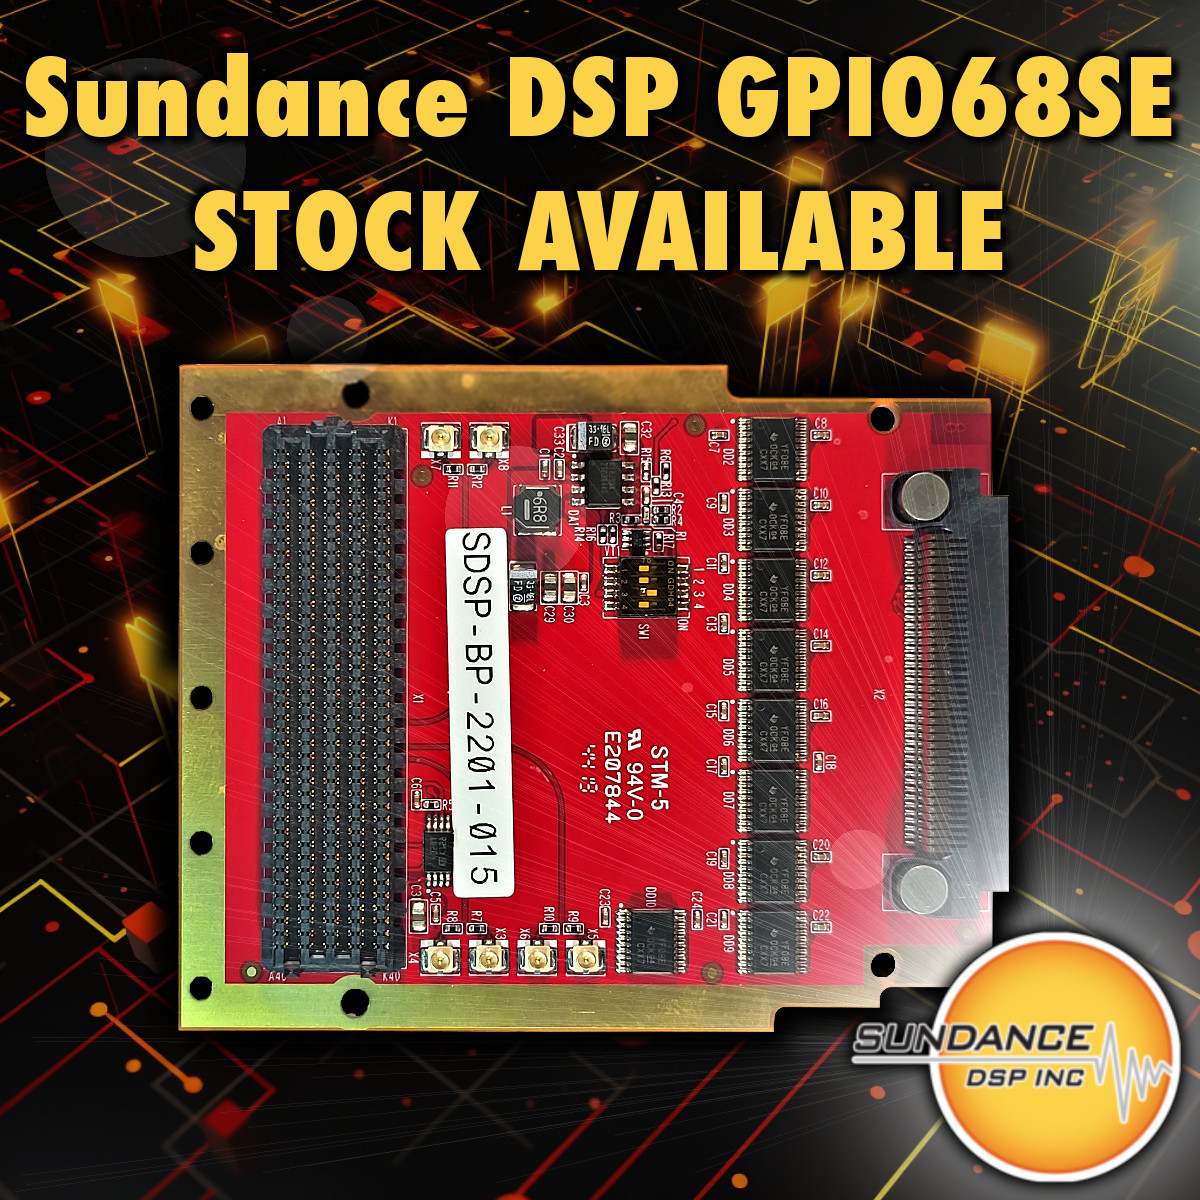 We have stock available of this conduction-cooled HPC FMC from Sundance Digital Signal Processing INC.

It provides 68 Single-Ended GPIOs through a connector at the front bezel.

sundance.com/fmc-gpio68se-i…

#FMC #FPGA #GPIOs #Samtec #SignalProcessing #IndustrialControl